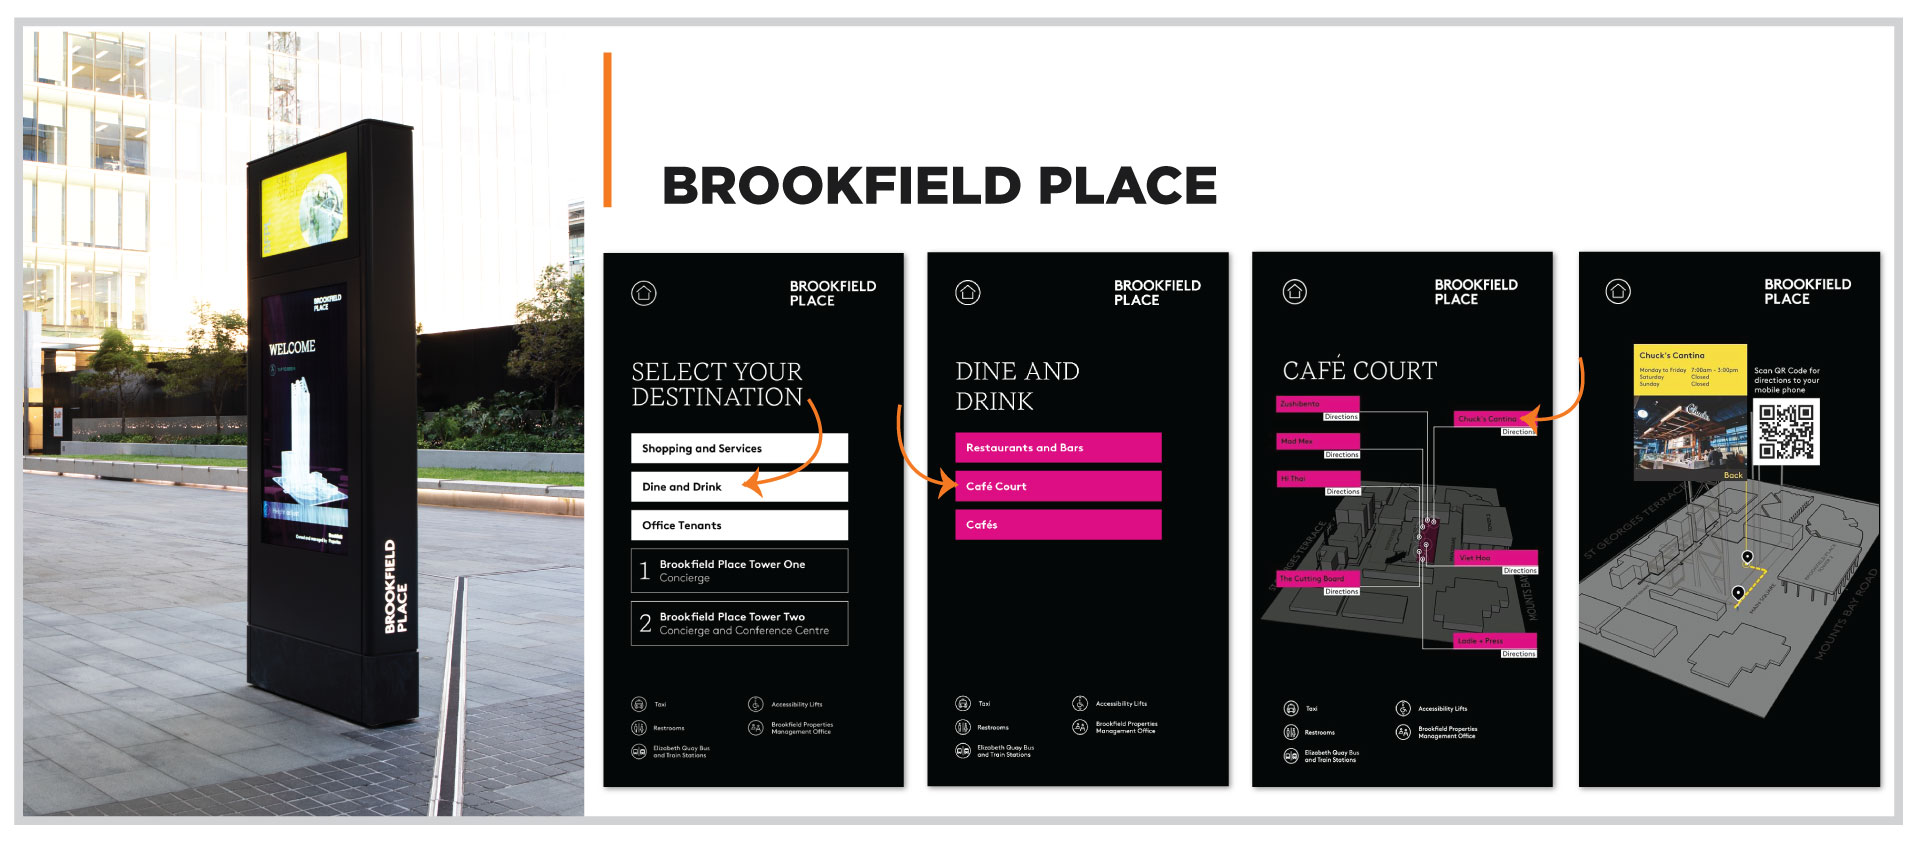 Brookfield-place_Touch-screen-content